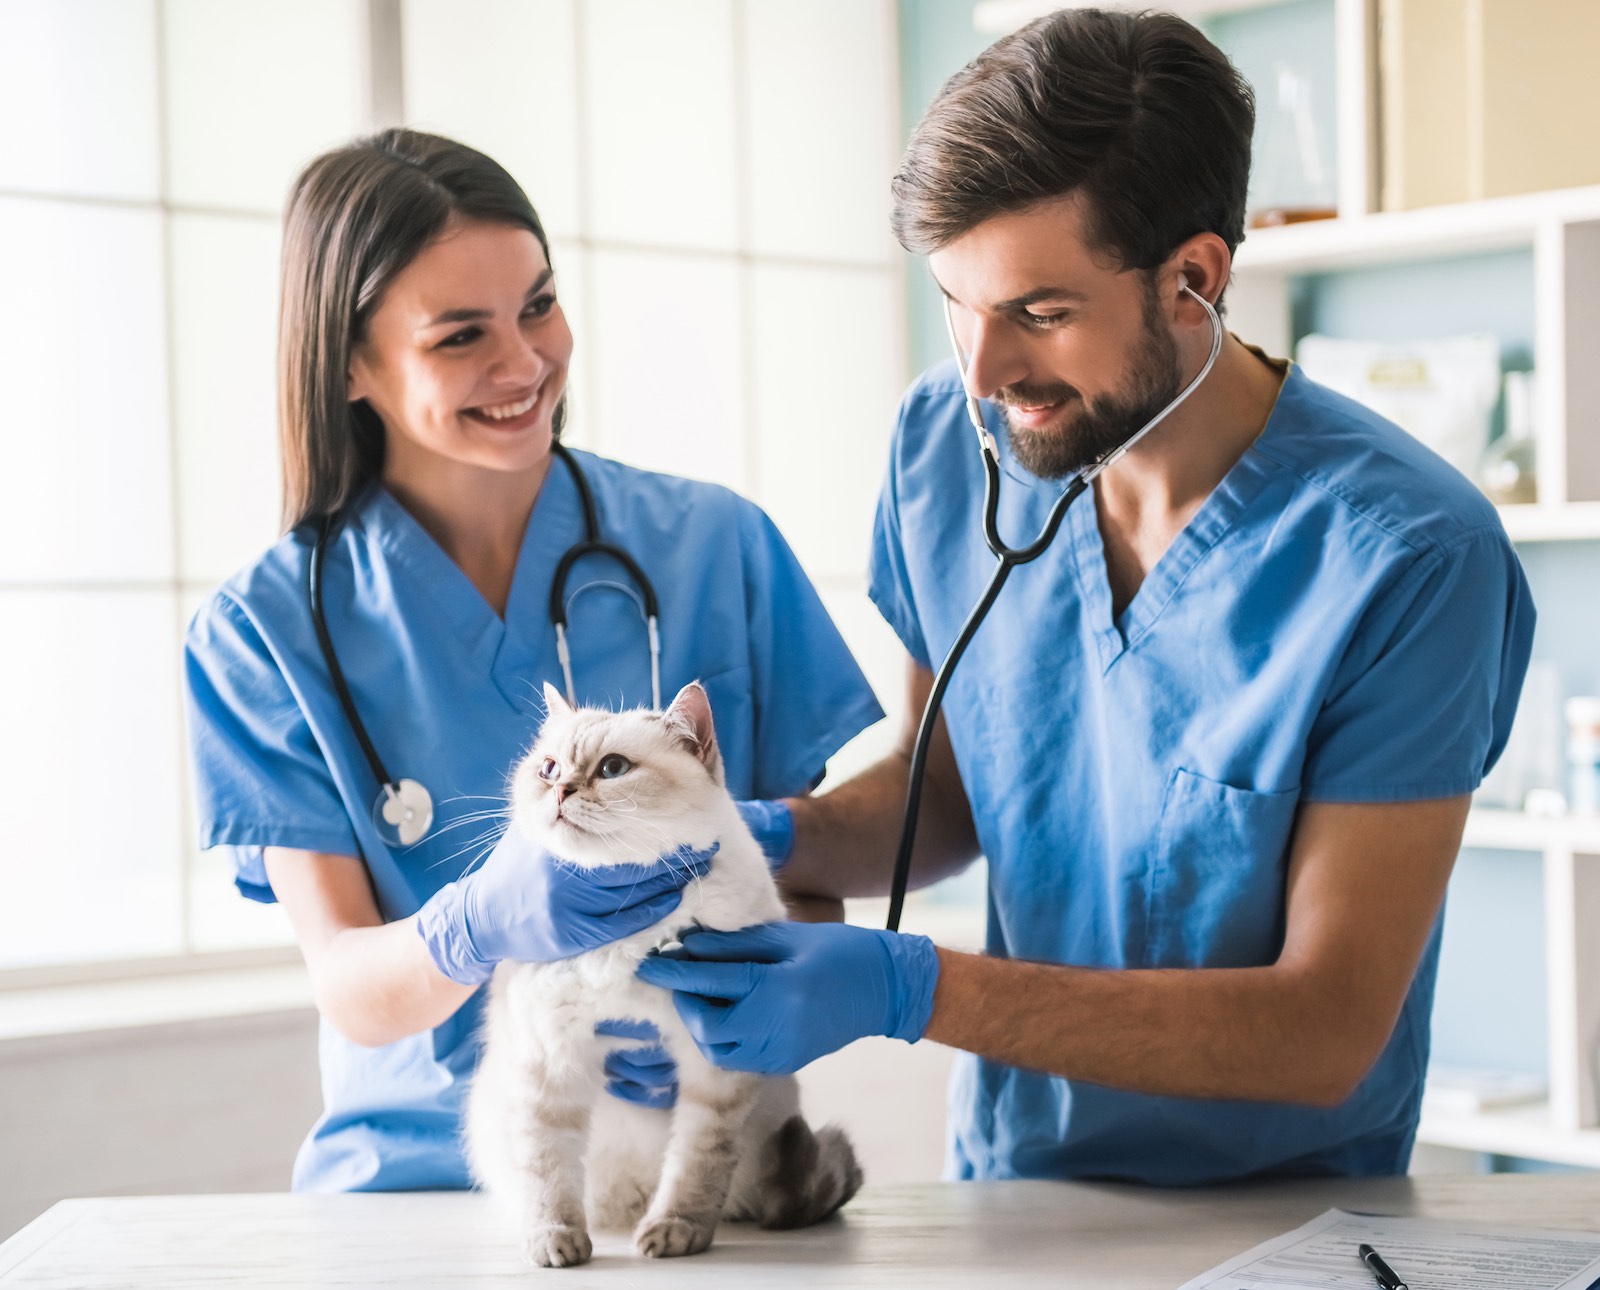 20-facts-about-veterinarians